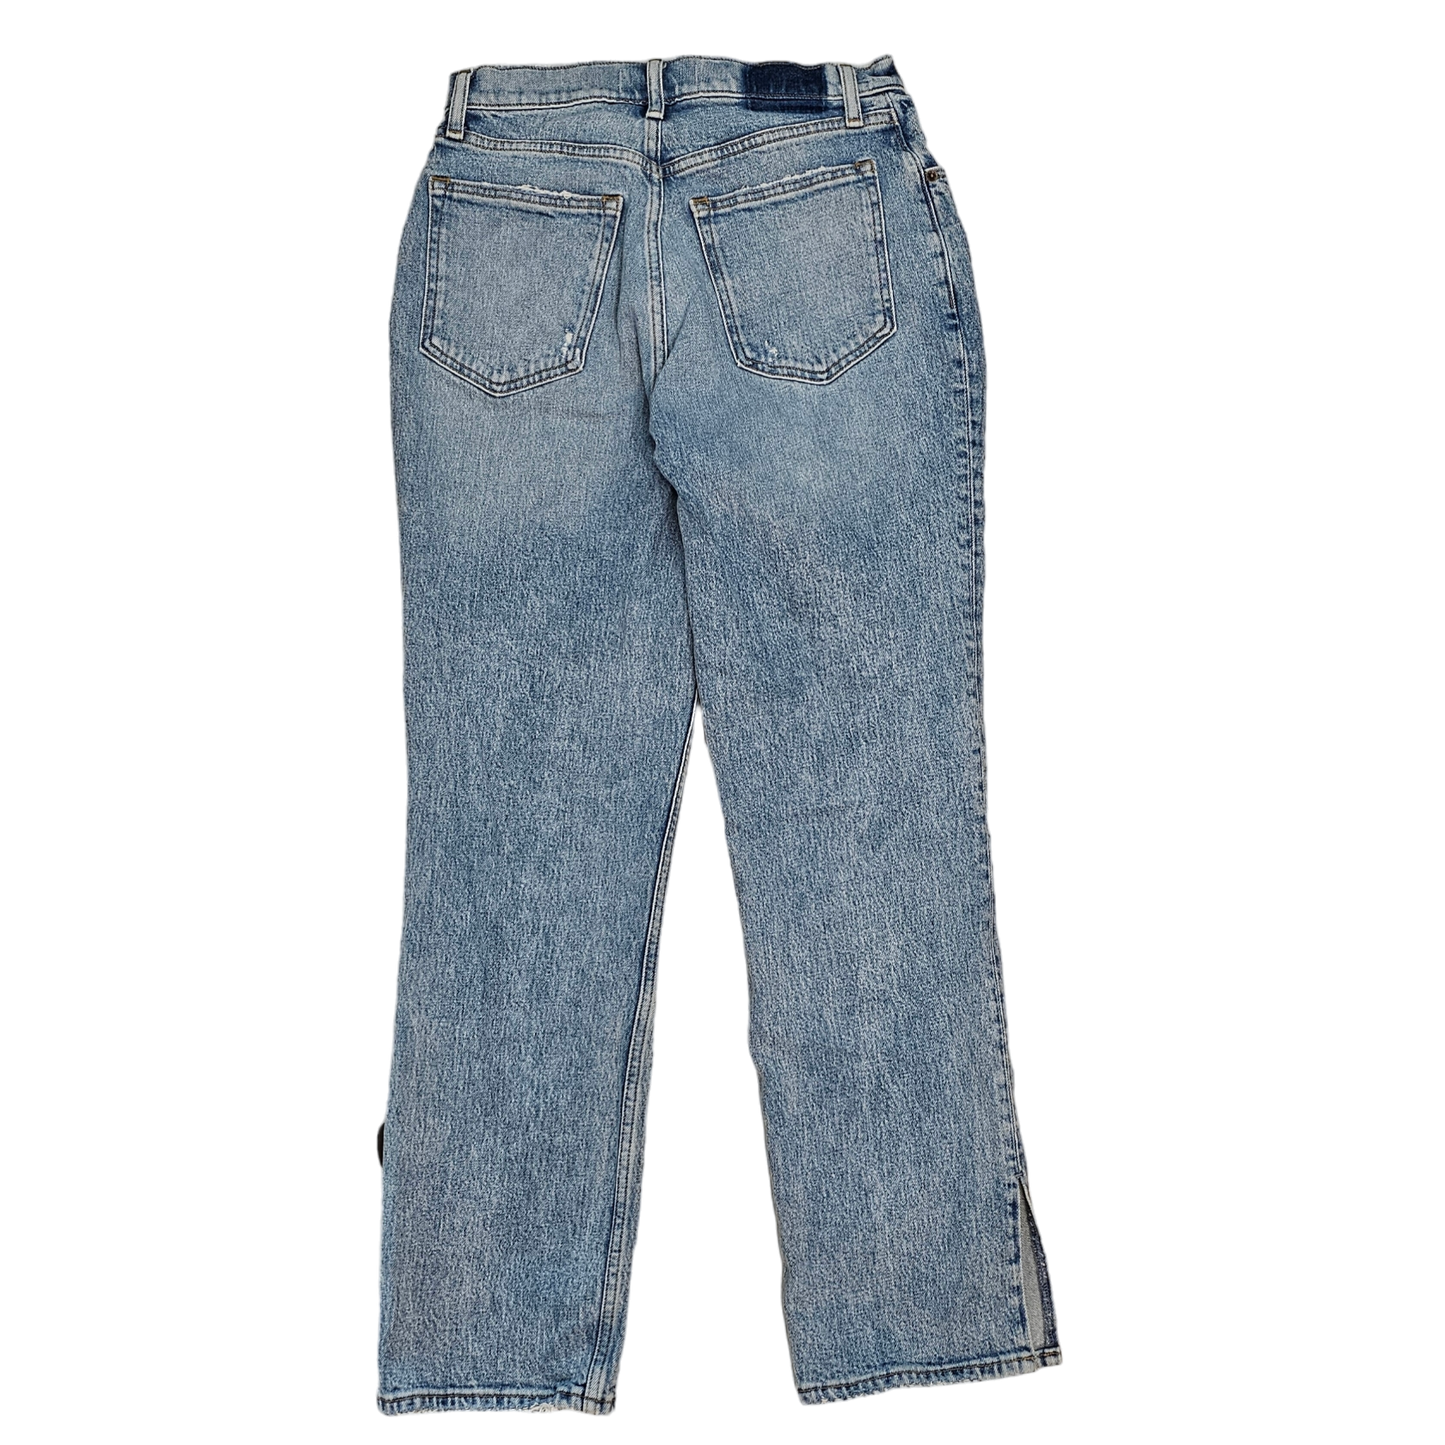 Jeans Boyfriend By Abercrombie And Fitch  Size: 8S